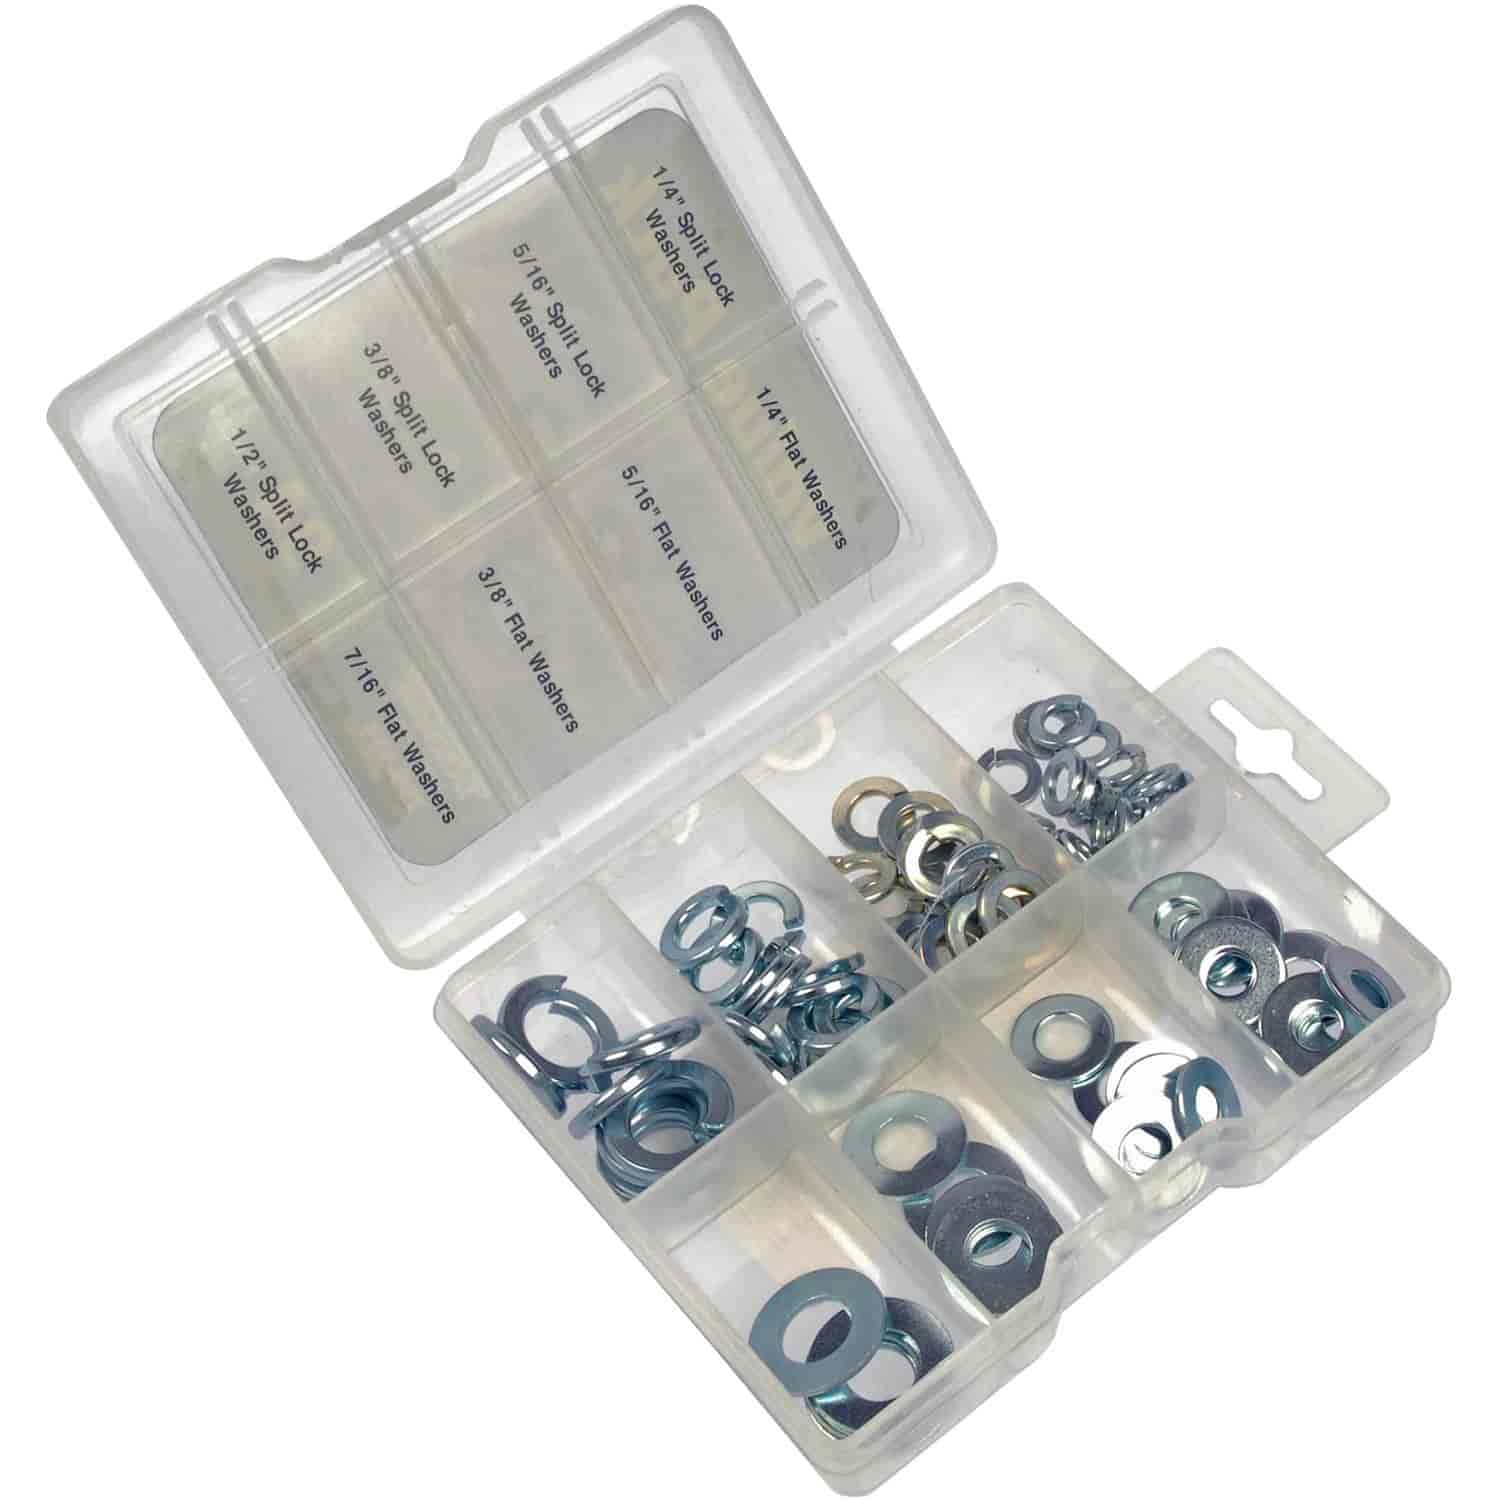 Dorman Products 799-335: WASHER ASSORTMENT JEGS